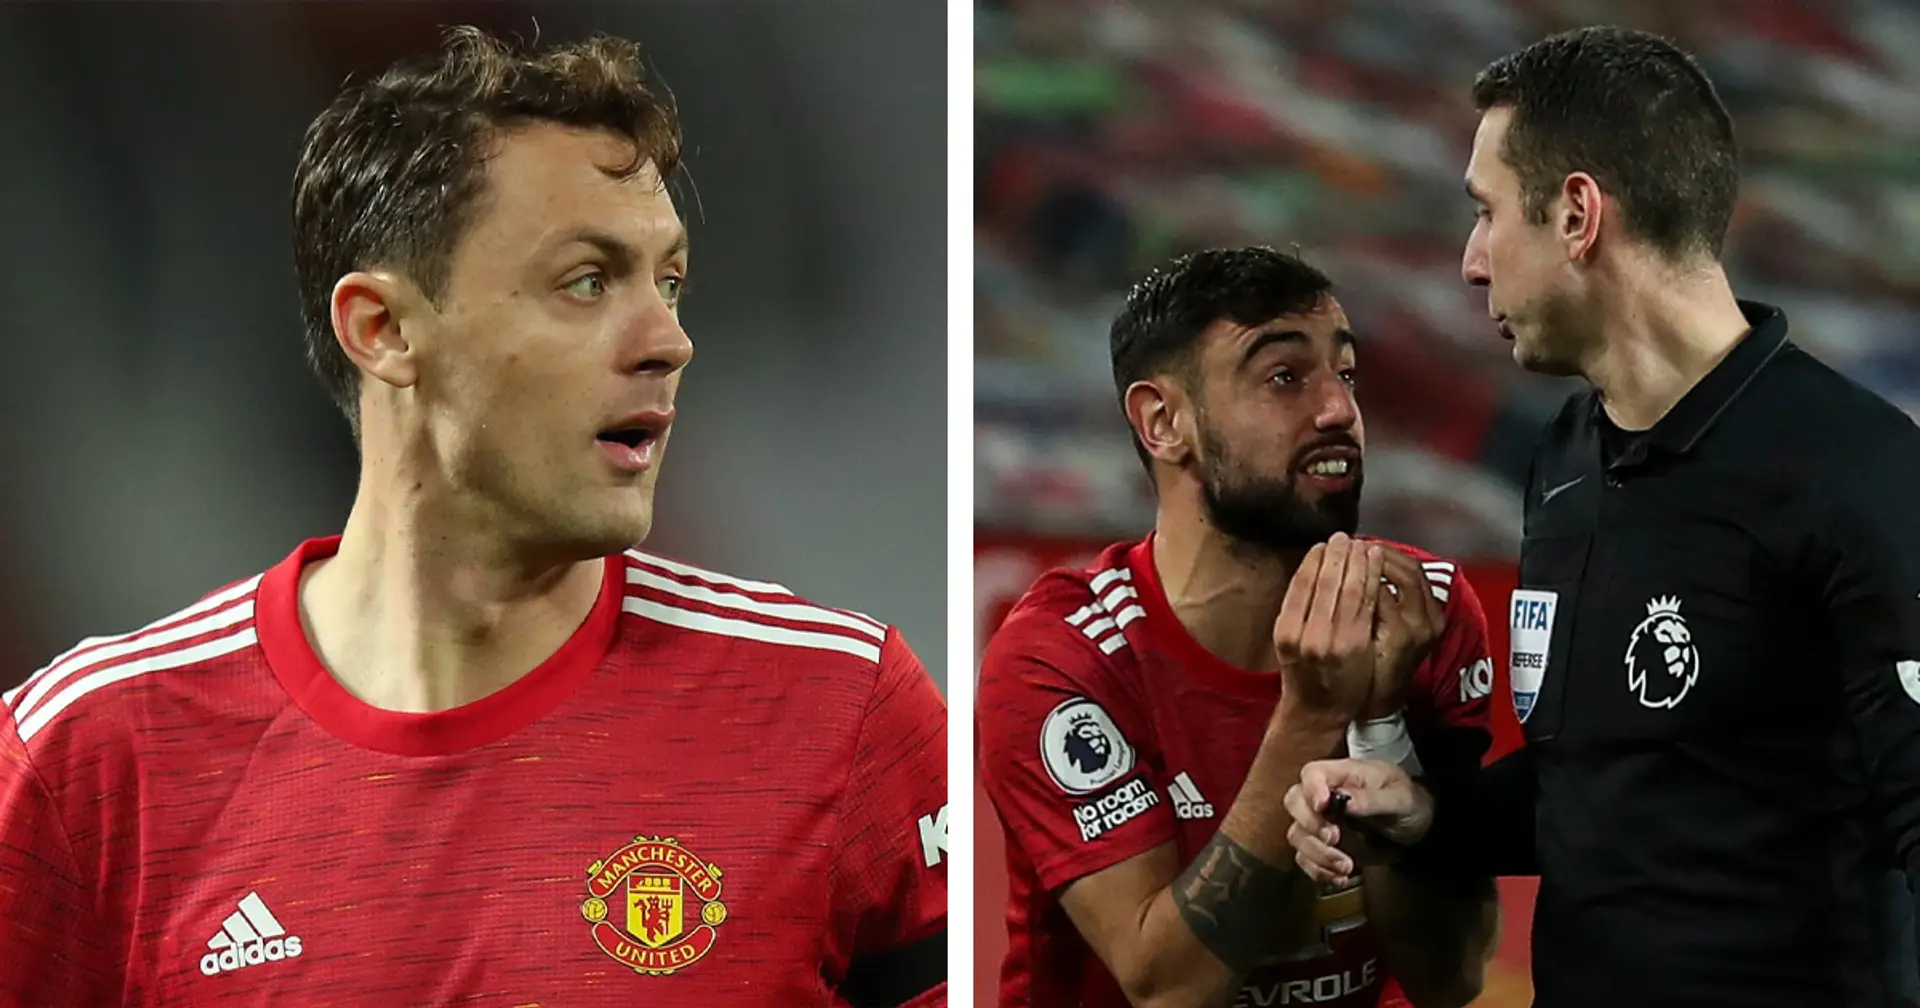 'He said straight away he had the ball': Nemanja Matic opens up on penalty controversy in Man United's box